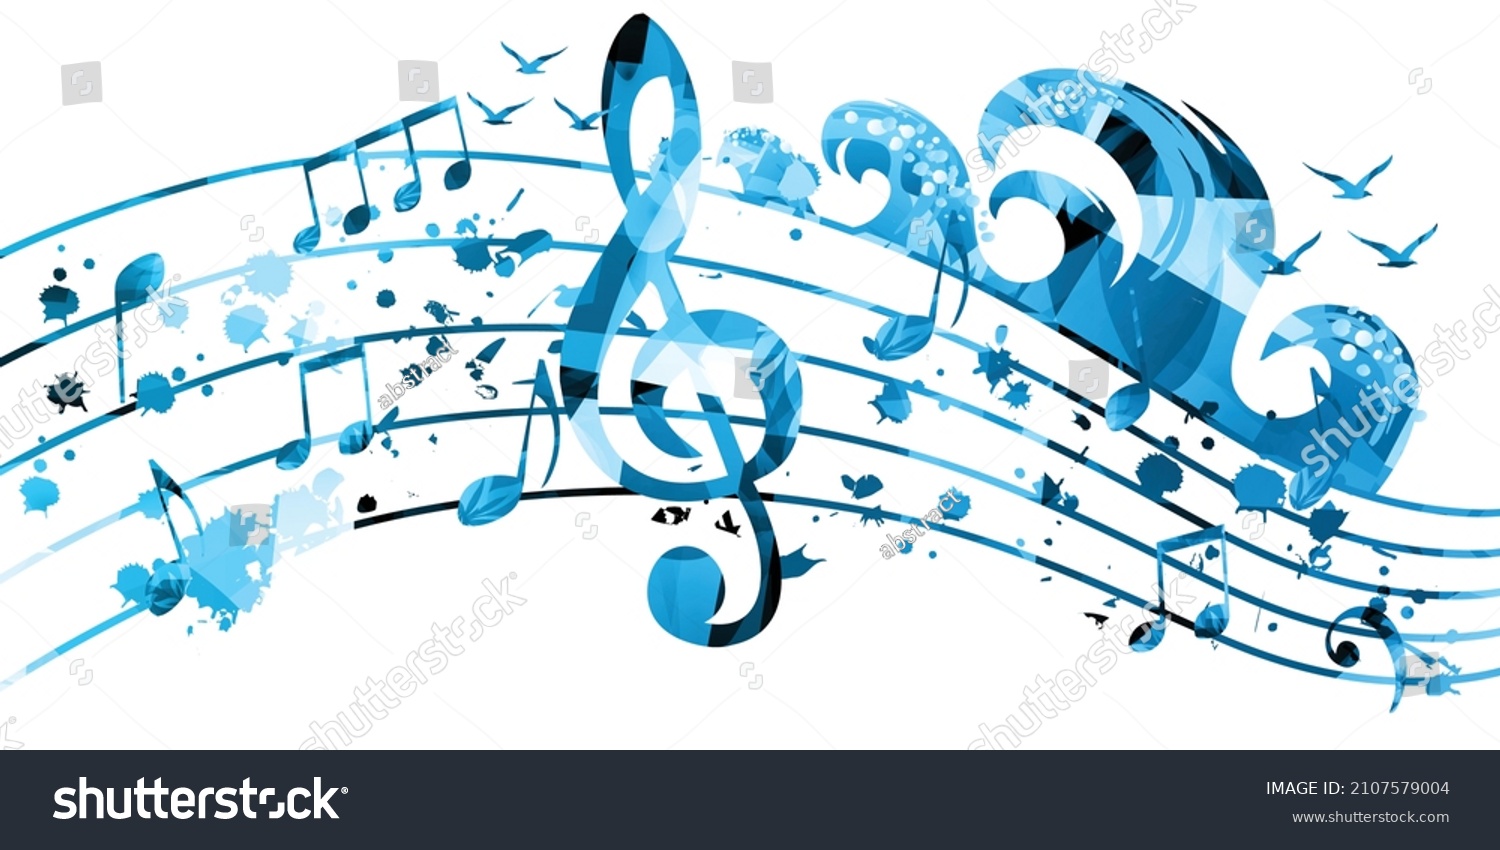 SVG of Musical poster with musical notes, waves and gulls isolated vector illustration. Inspirational music, composing, creating music. Design for live concert events, music festivals, shows, party flyers svg